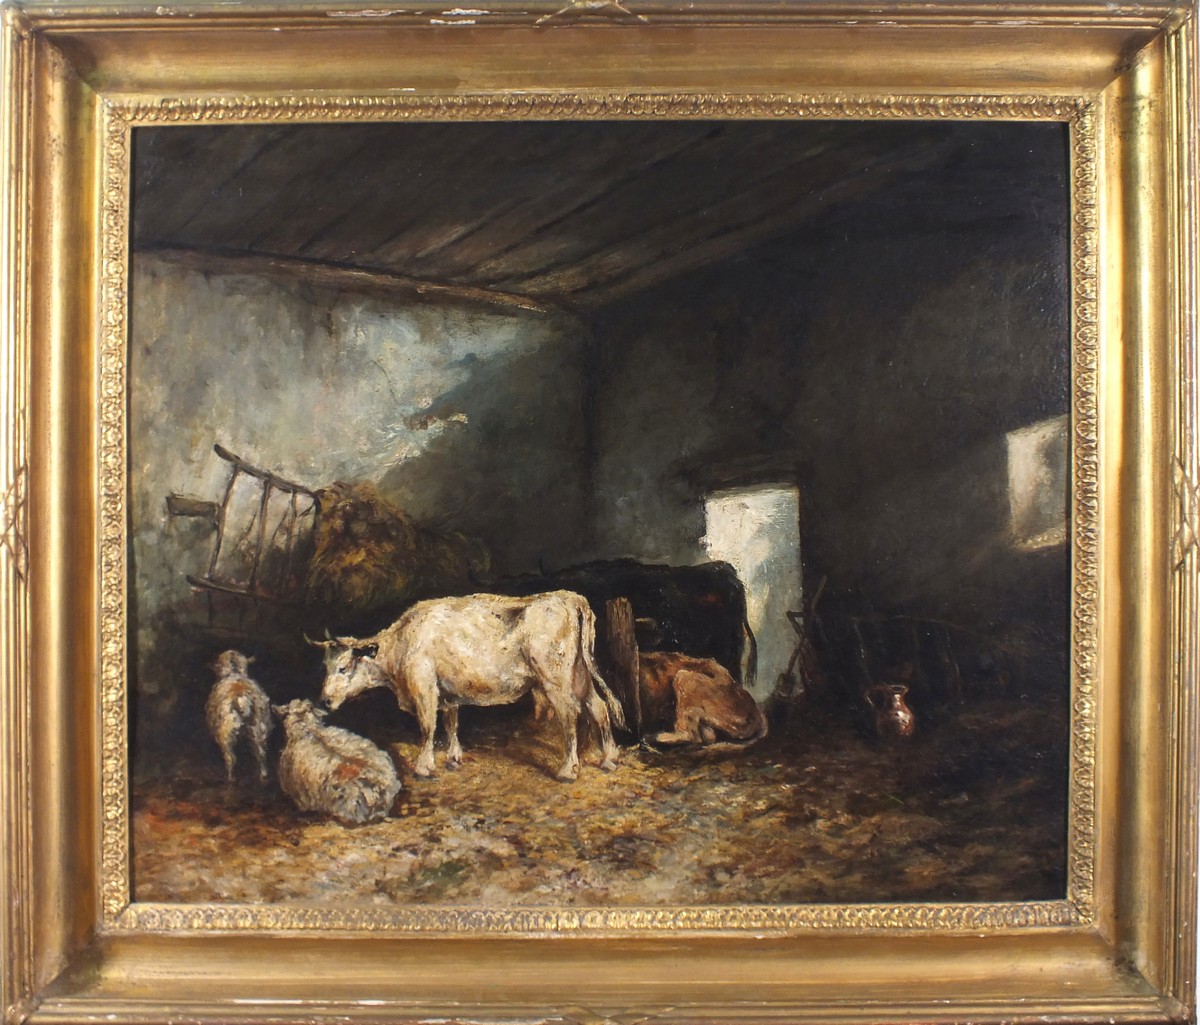 Late 19th Century Continental School Cattle in a Barn, Oil on board, 19.75" x 23.5" (50cm x 60cm) - Image 3 of 4